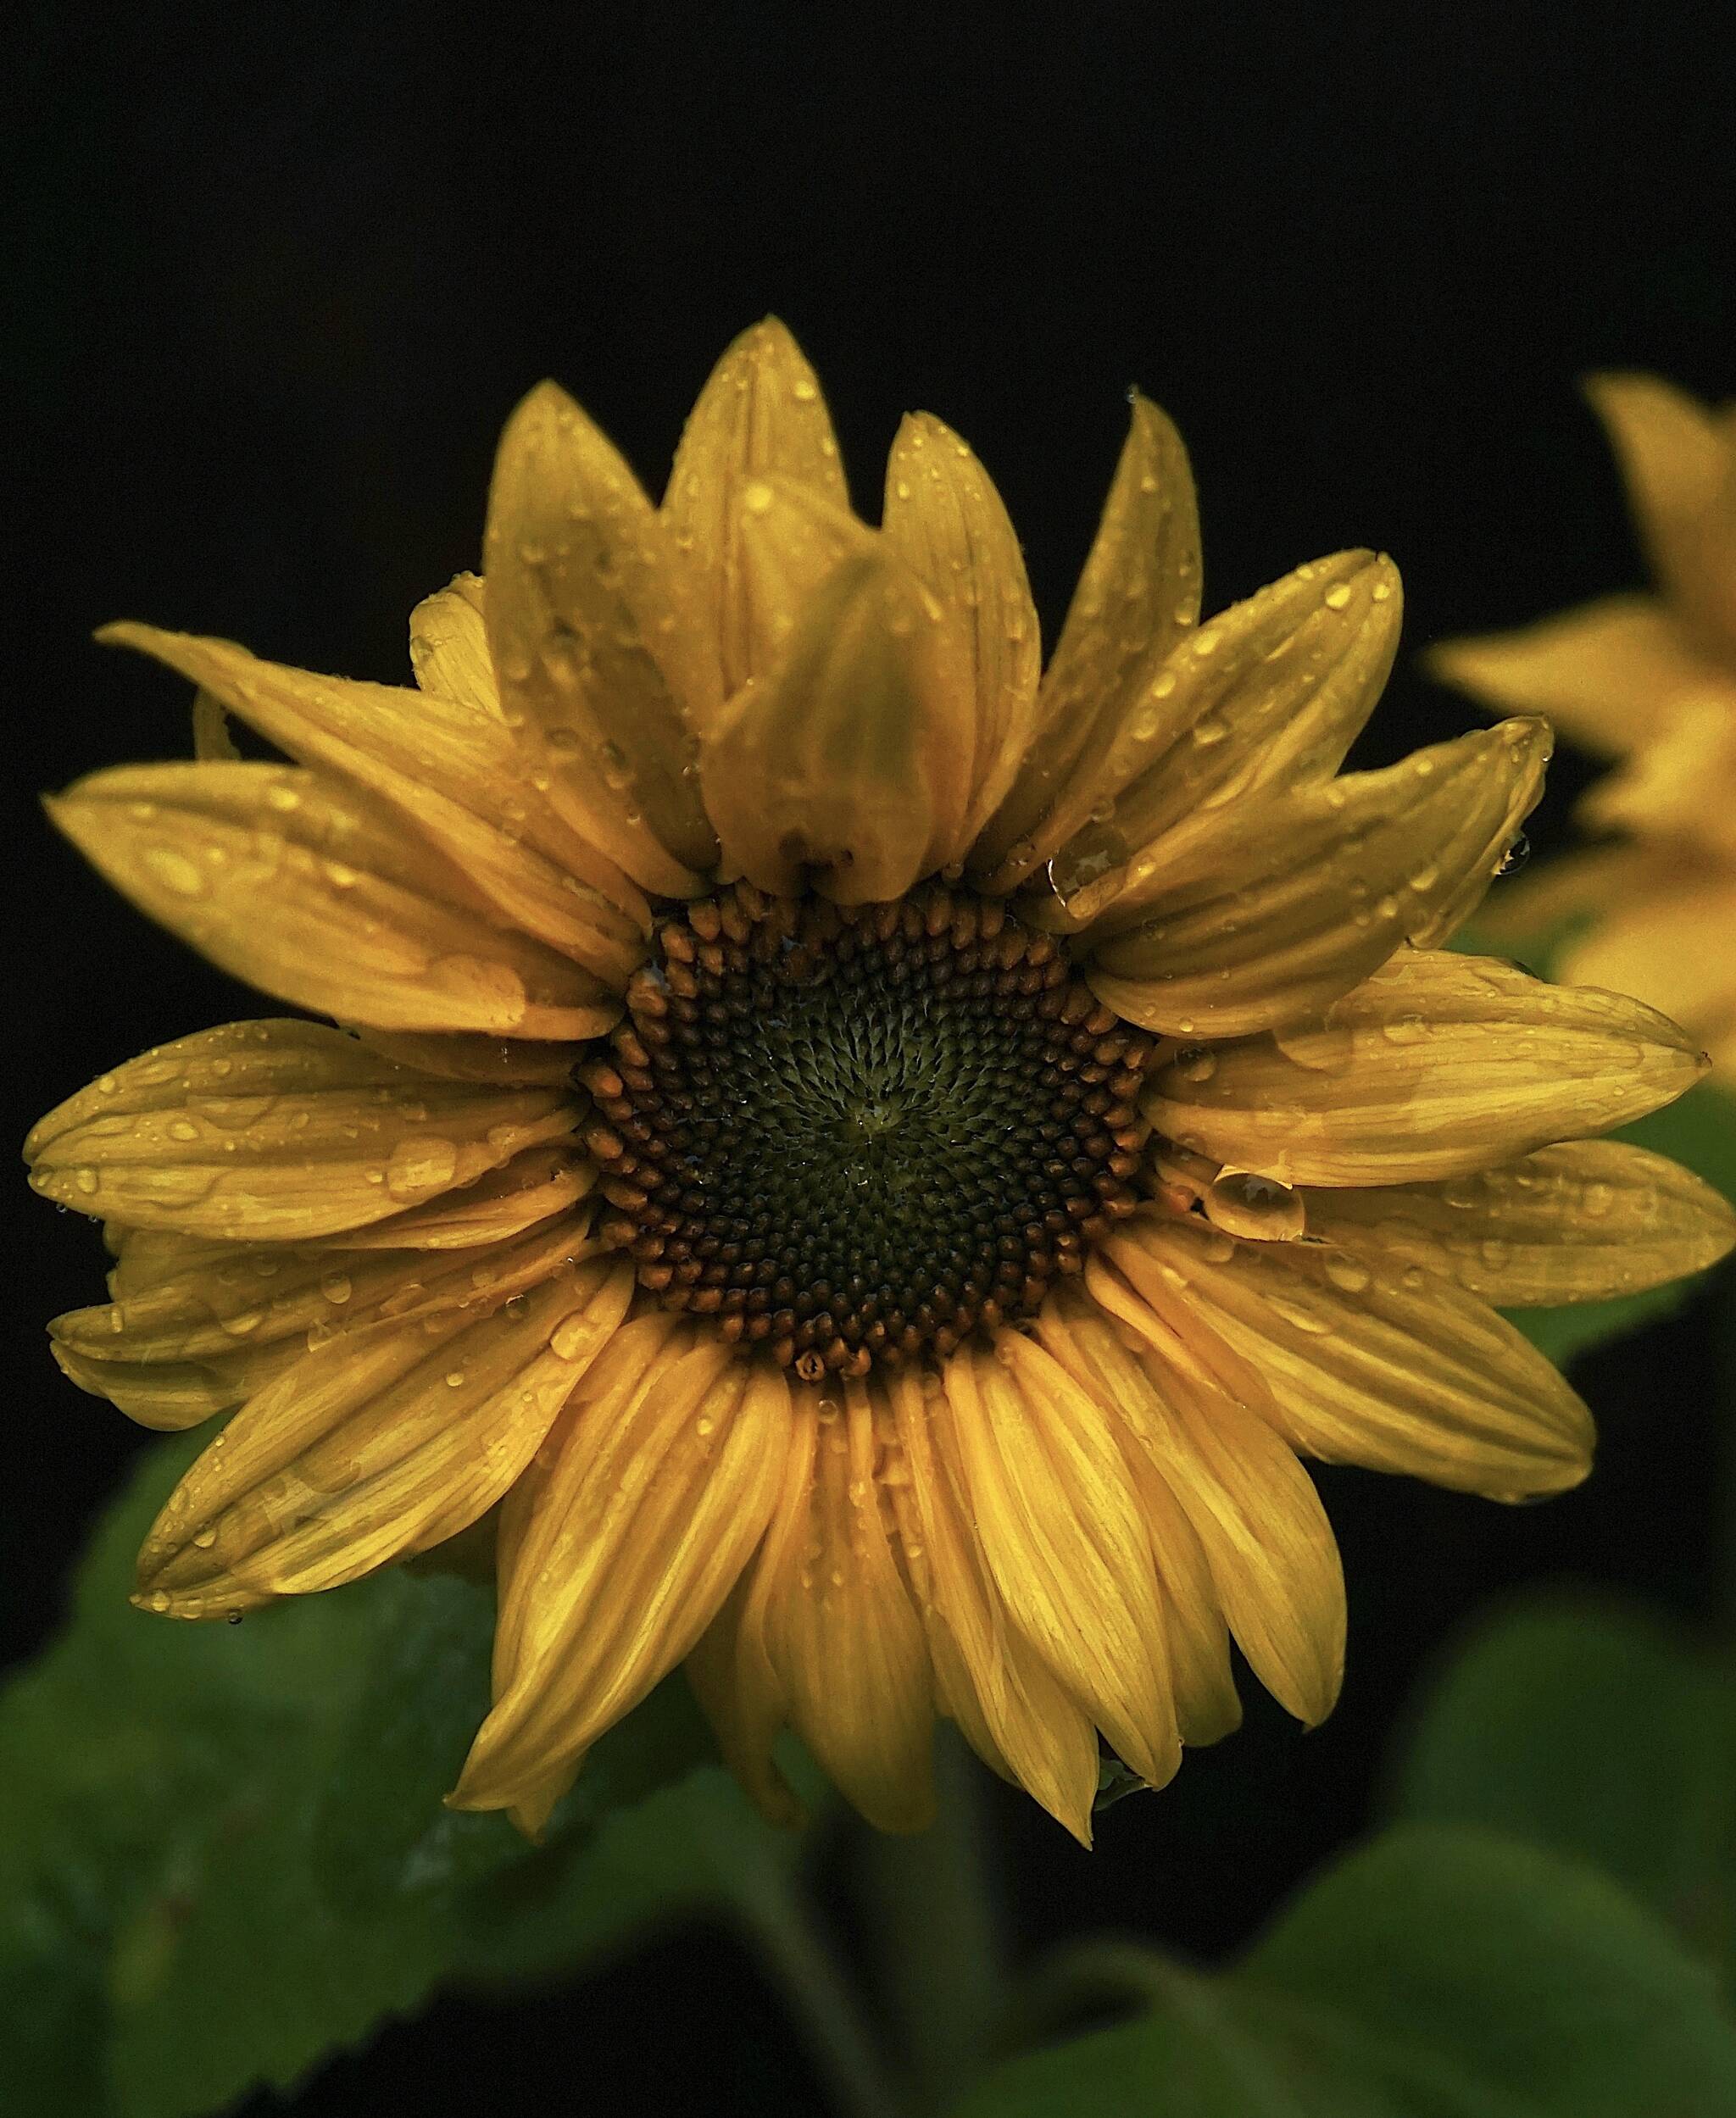 A sunflower on a rainy late summer morning on Prince of Wales Island on Sept. 15. (Photo by Marti Crutcher)